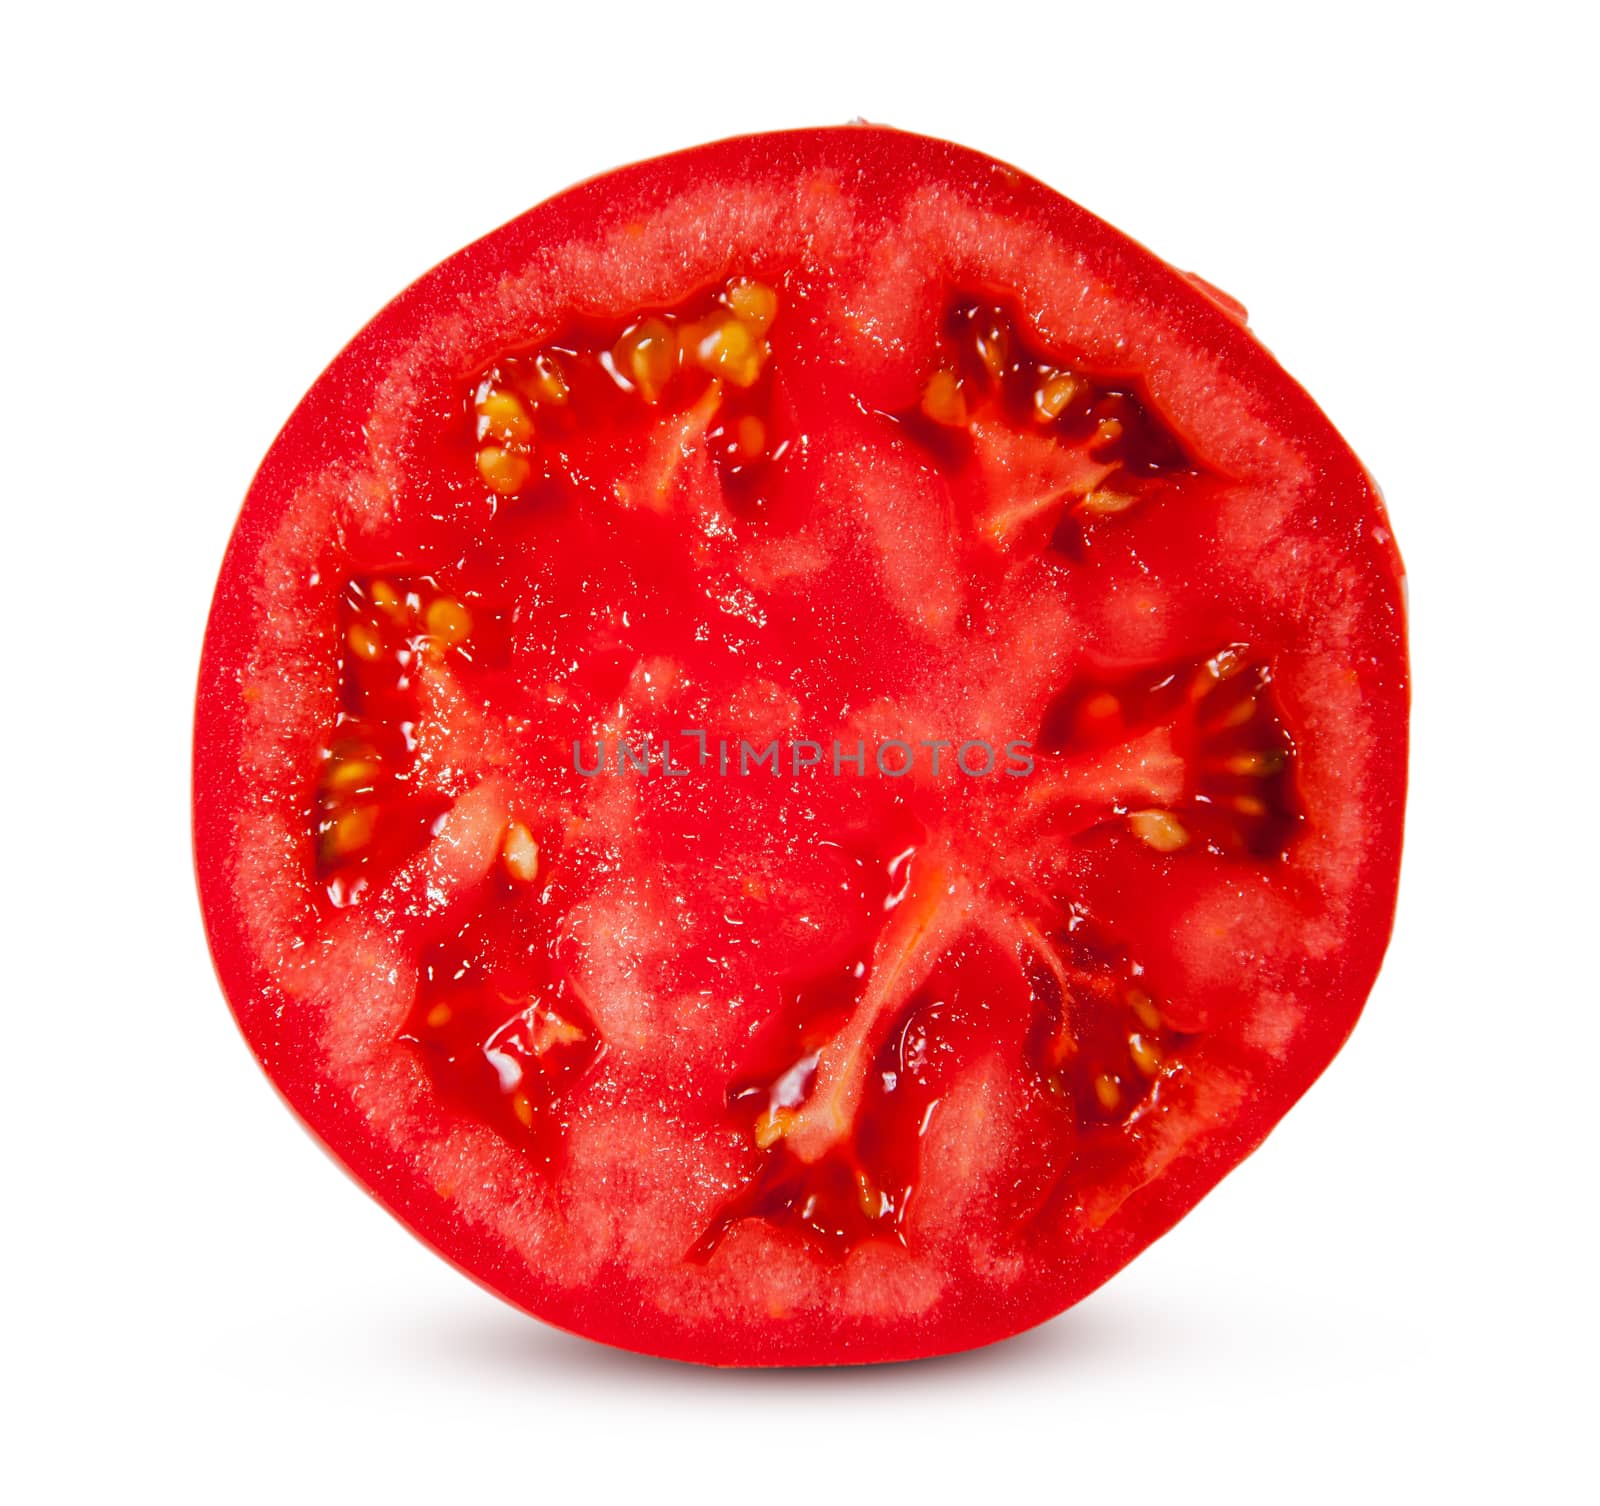 One half juicy red tomato isolated on white background